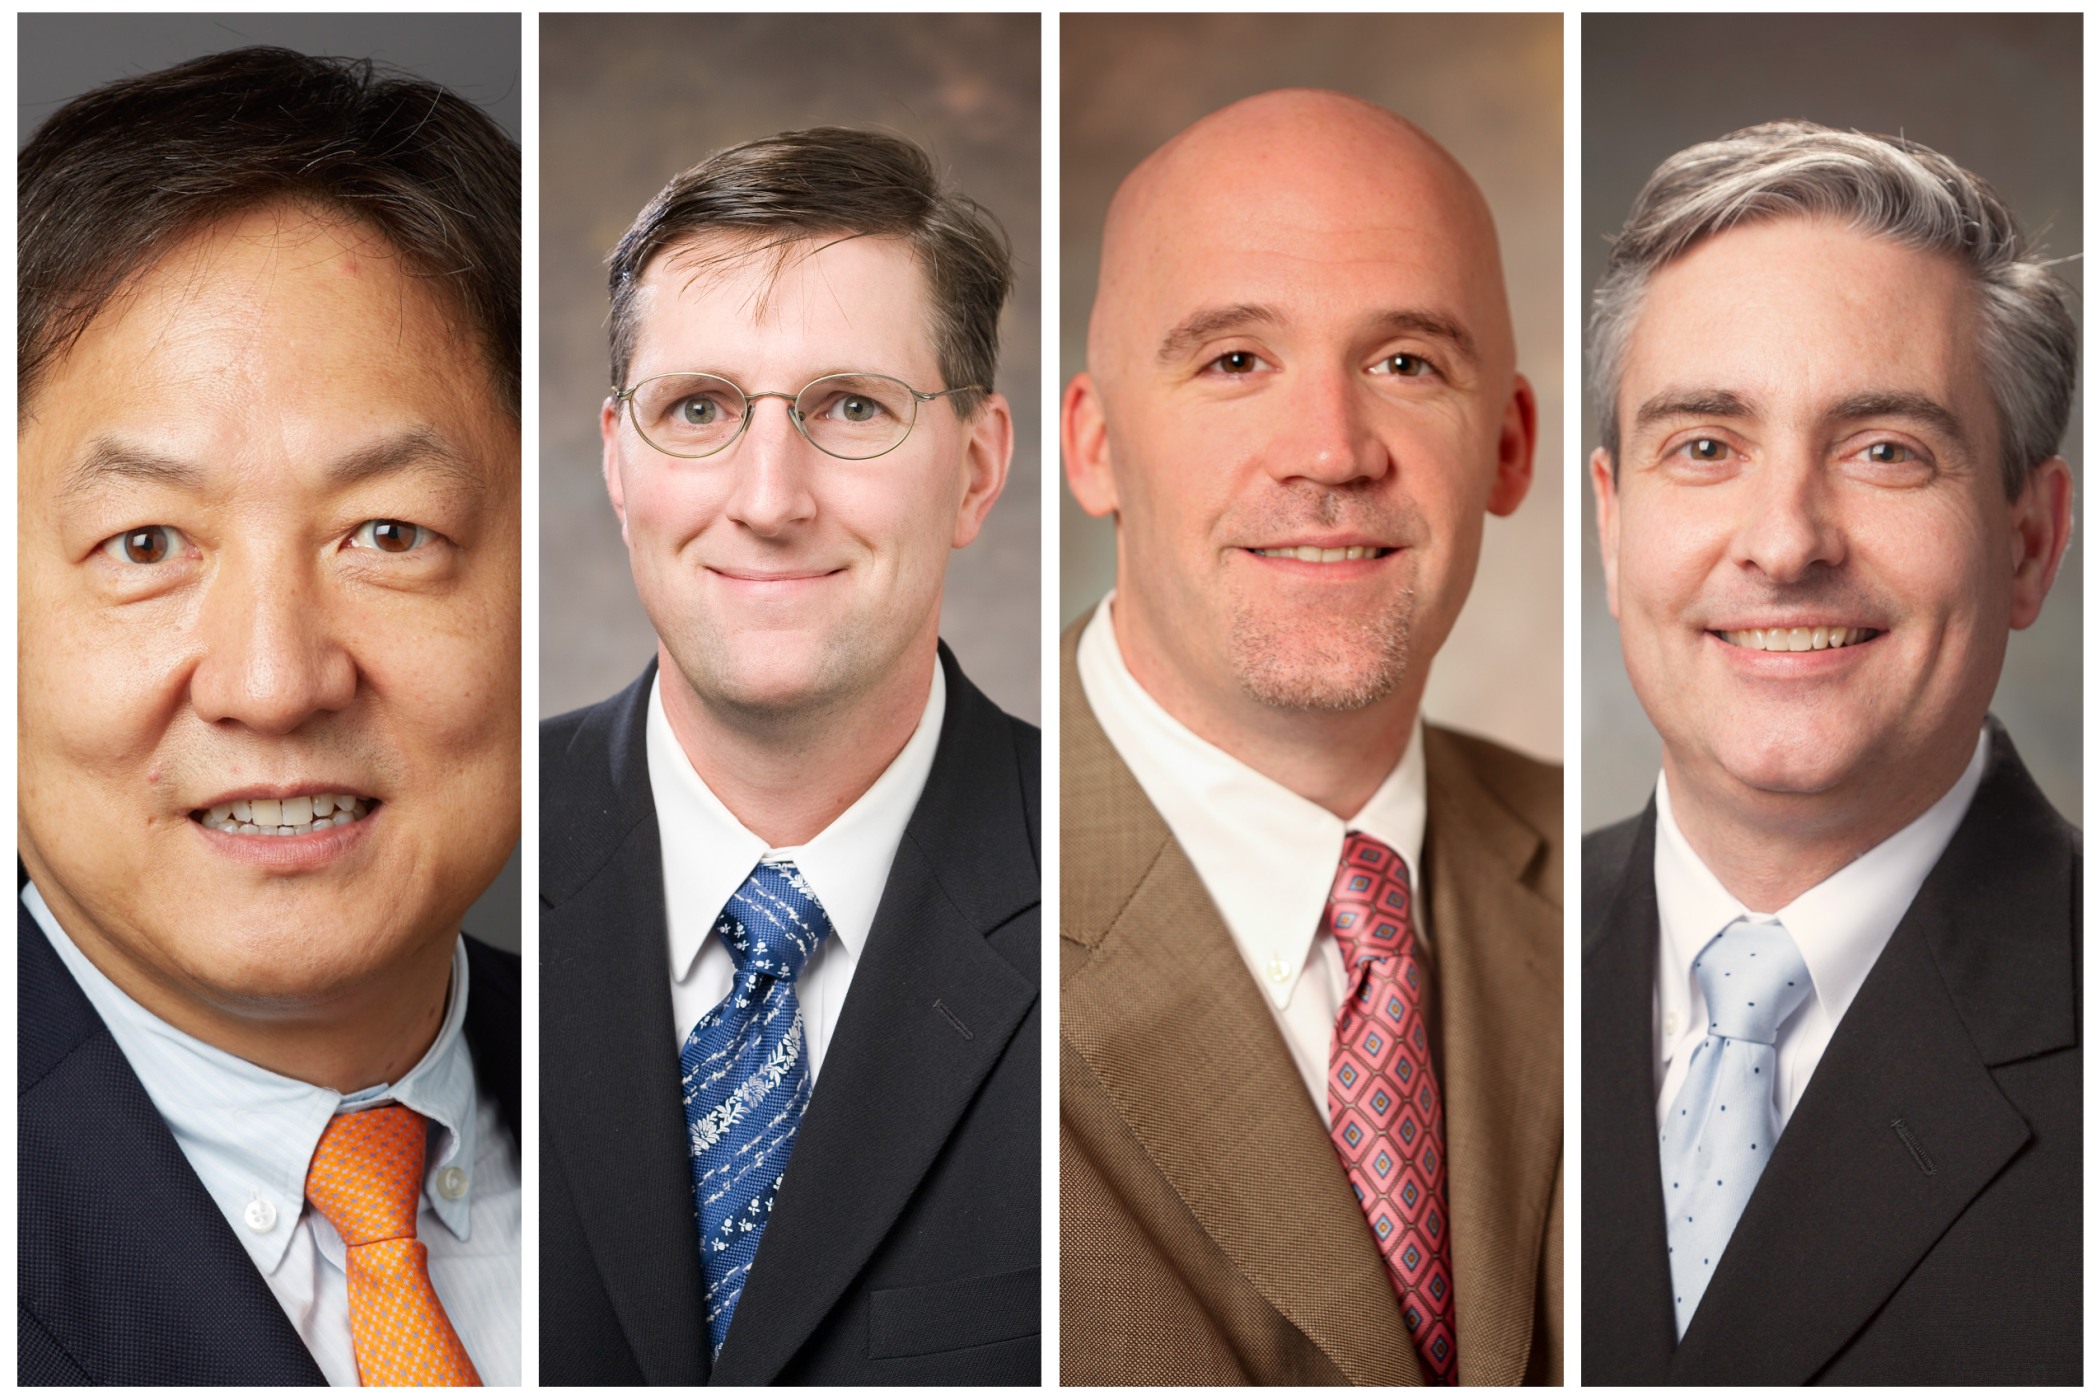 Yale Orthopaedics & Rehabilitation Appoints Four New Vice Chairs